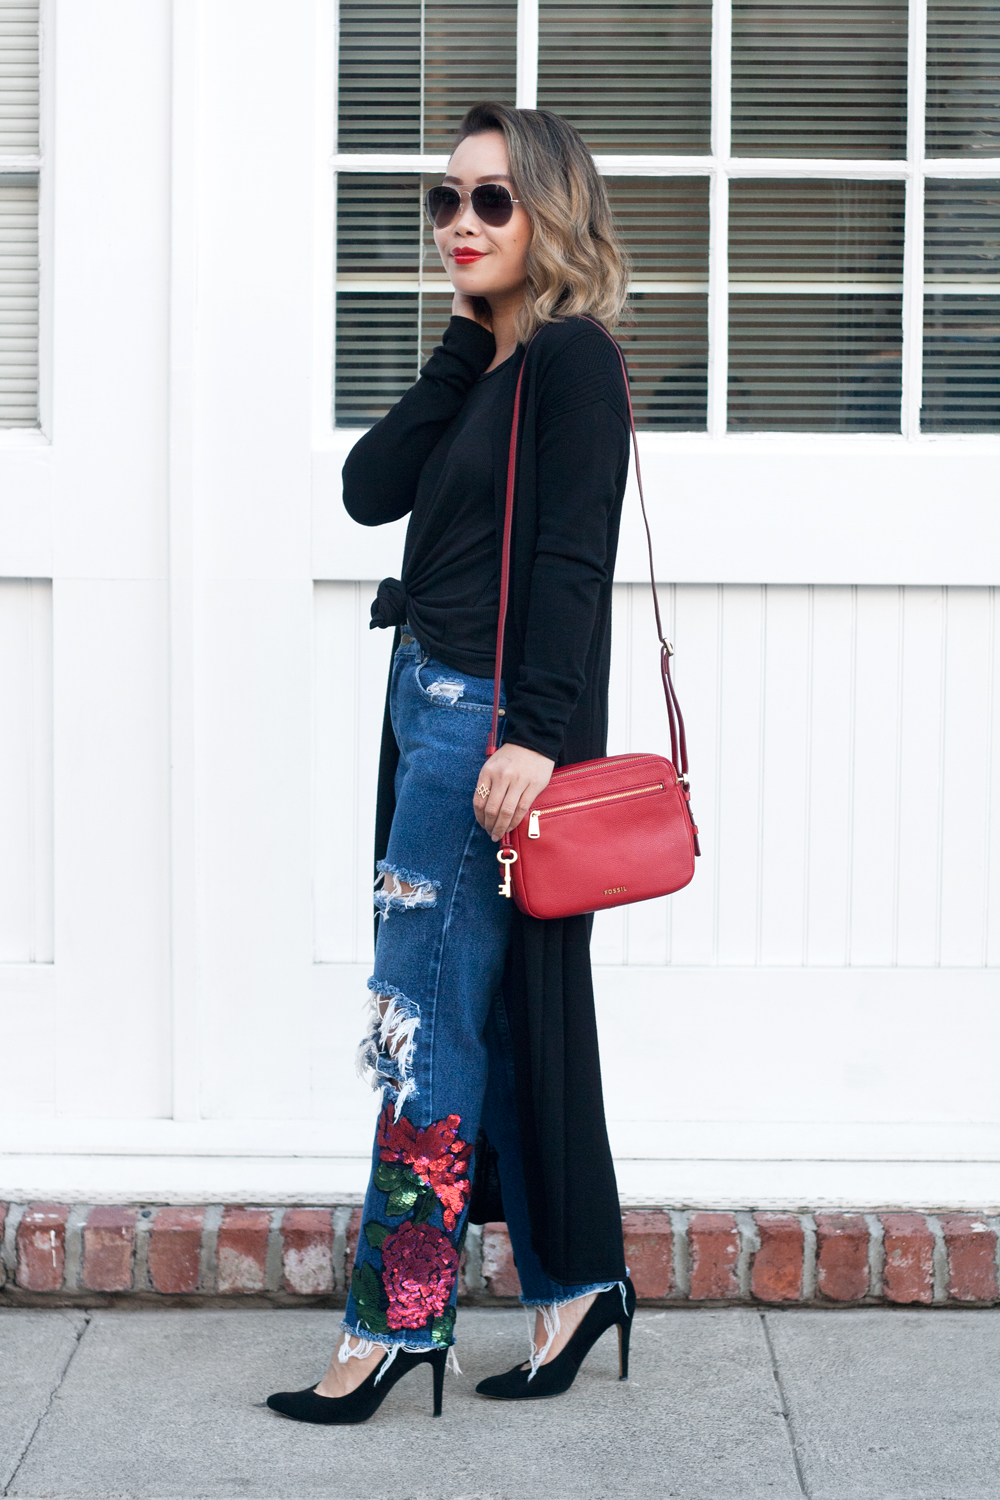 04holiday-sequins-floral-denim-red-fossil-style-fashion